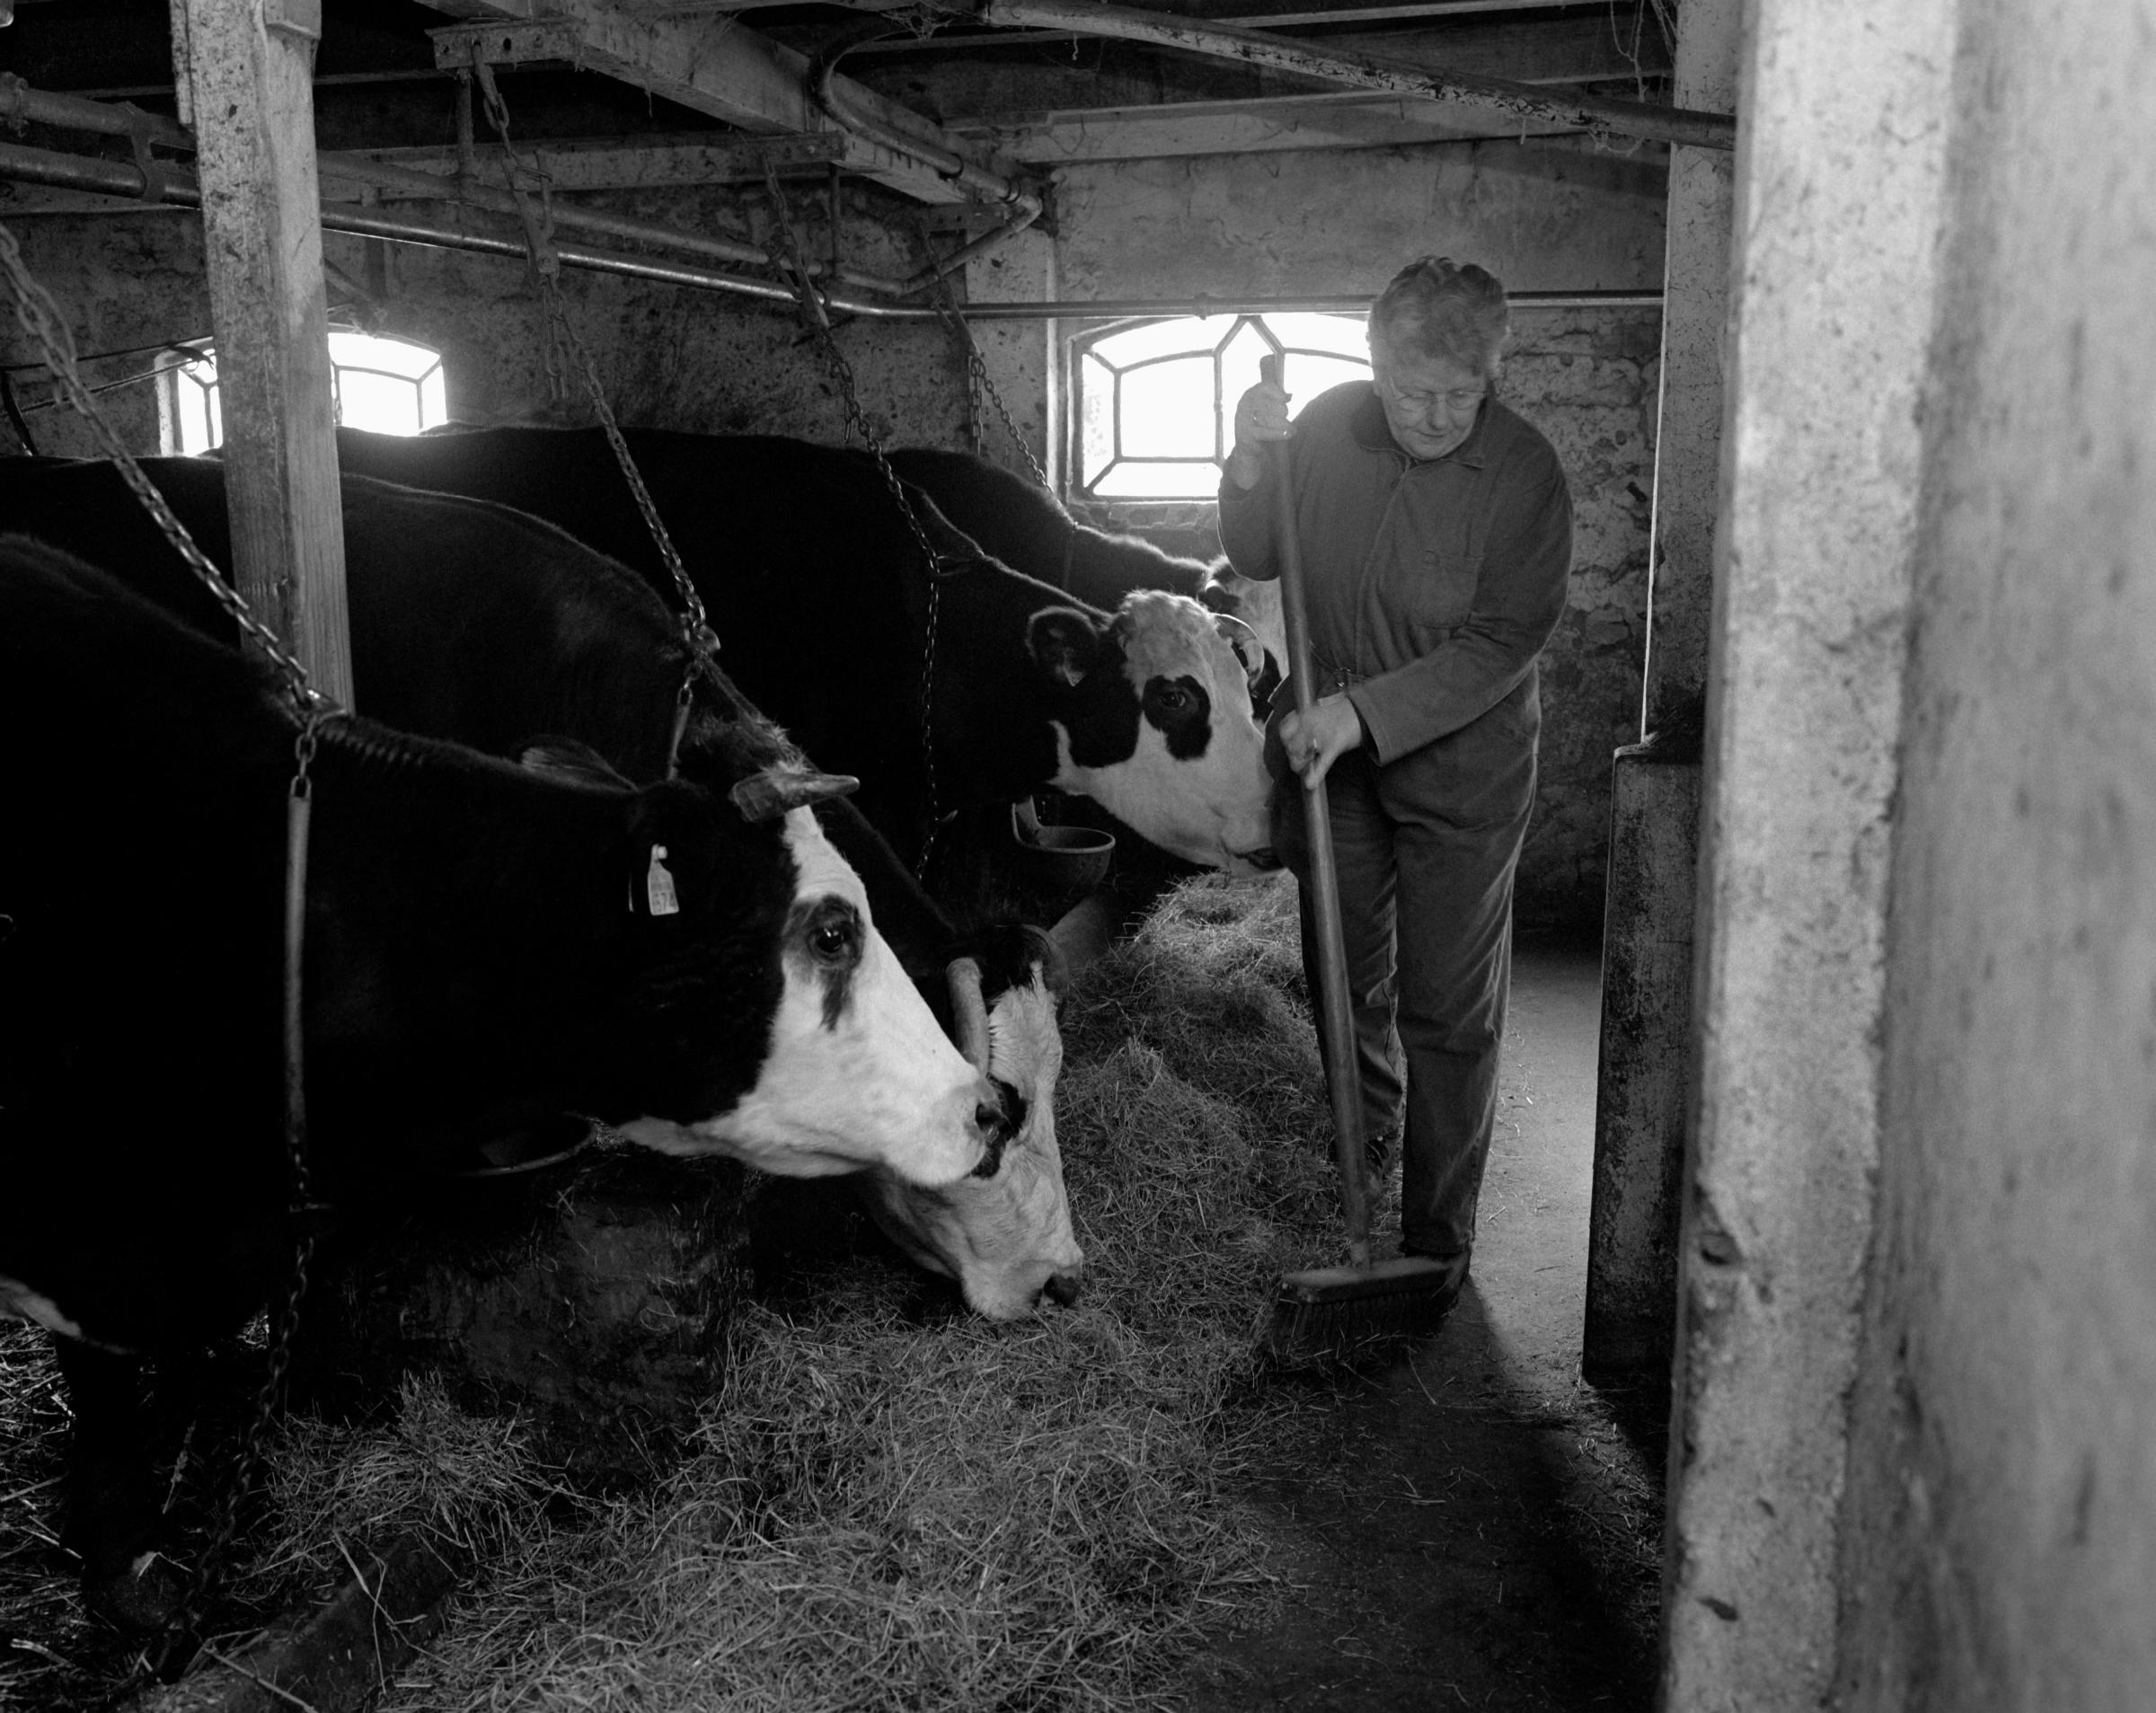 The Final Days of a Dairy Farm - In the cowshed farmer Gre Molenaar sweeps the hay...